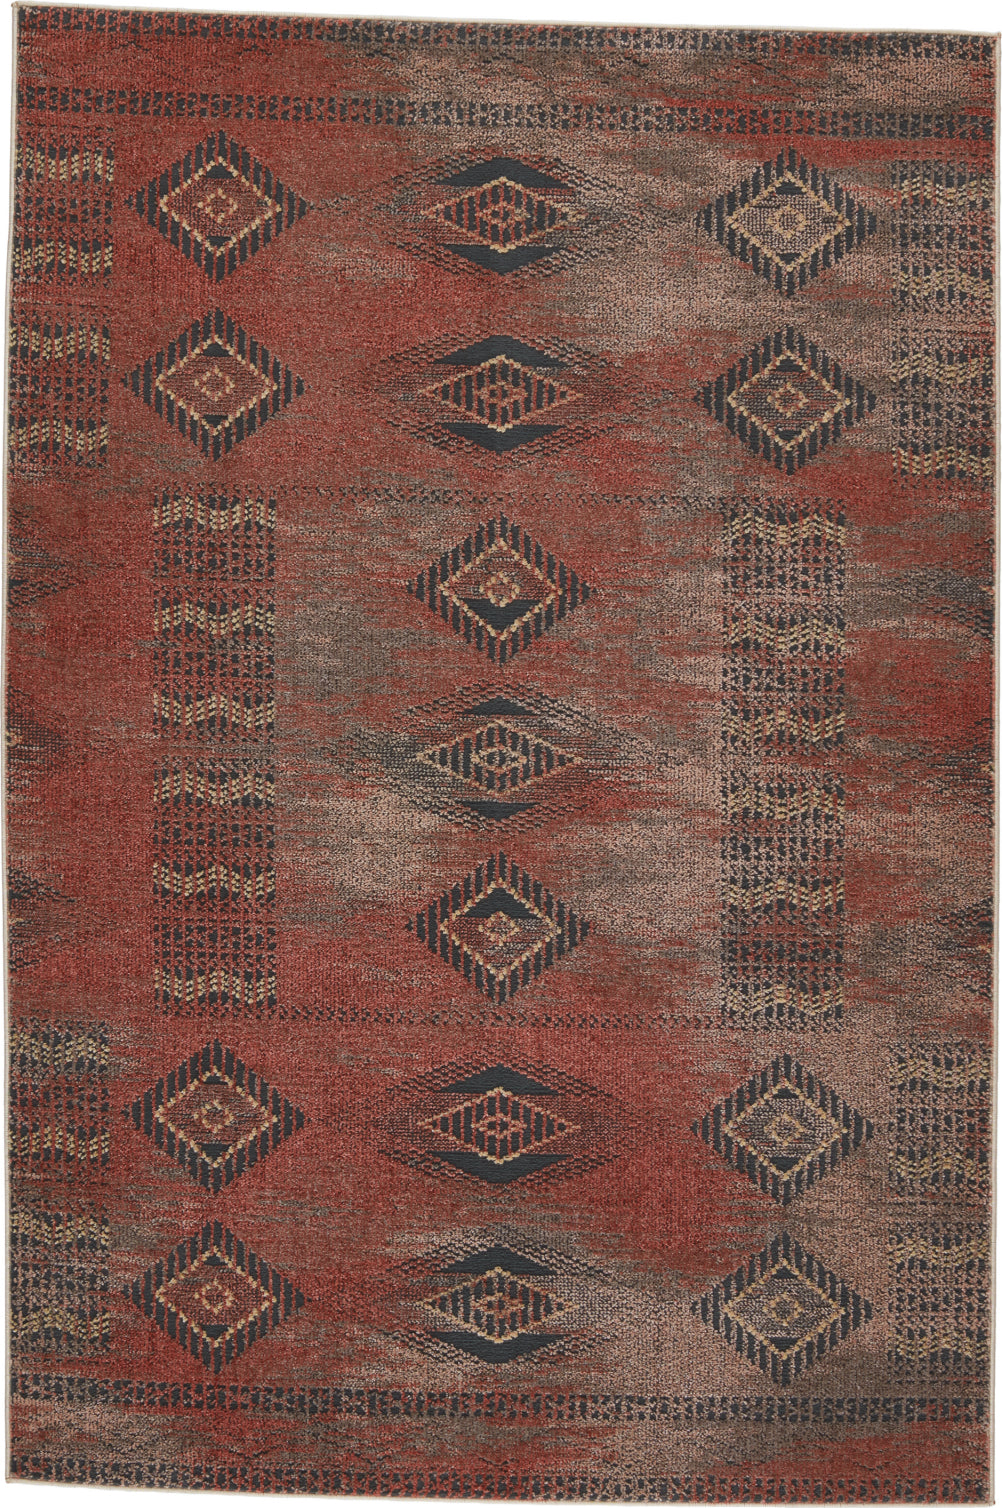 Jaipur Living Artigas Abrego ARG02 Red/Gray Area Rug by Vibe- Top Down